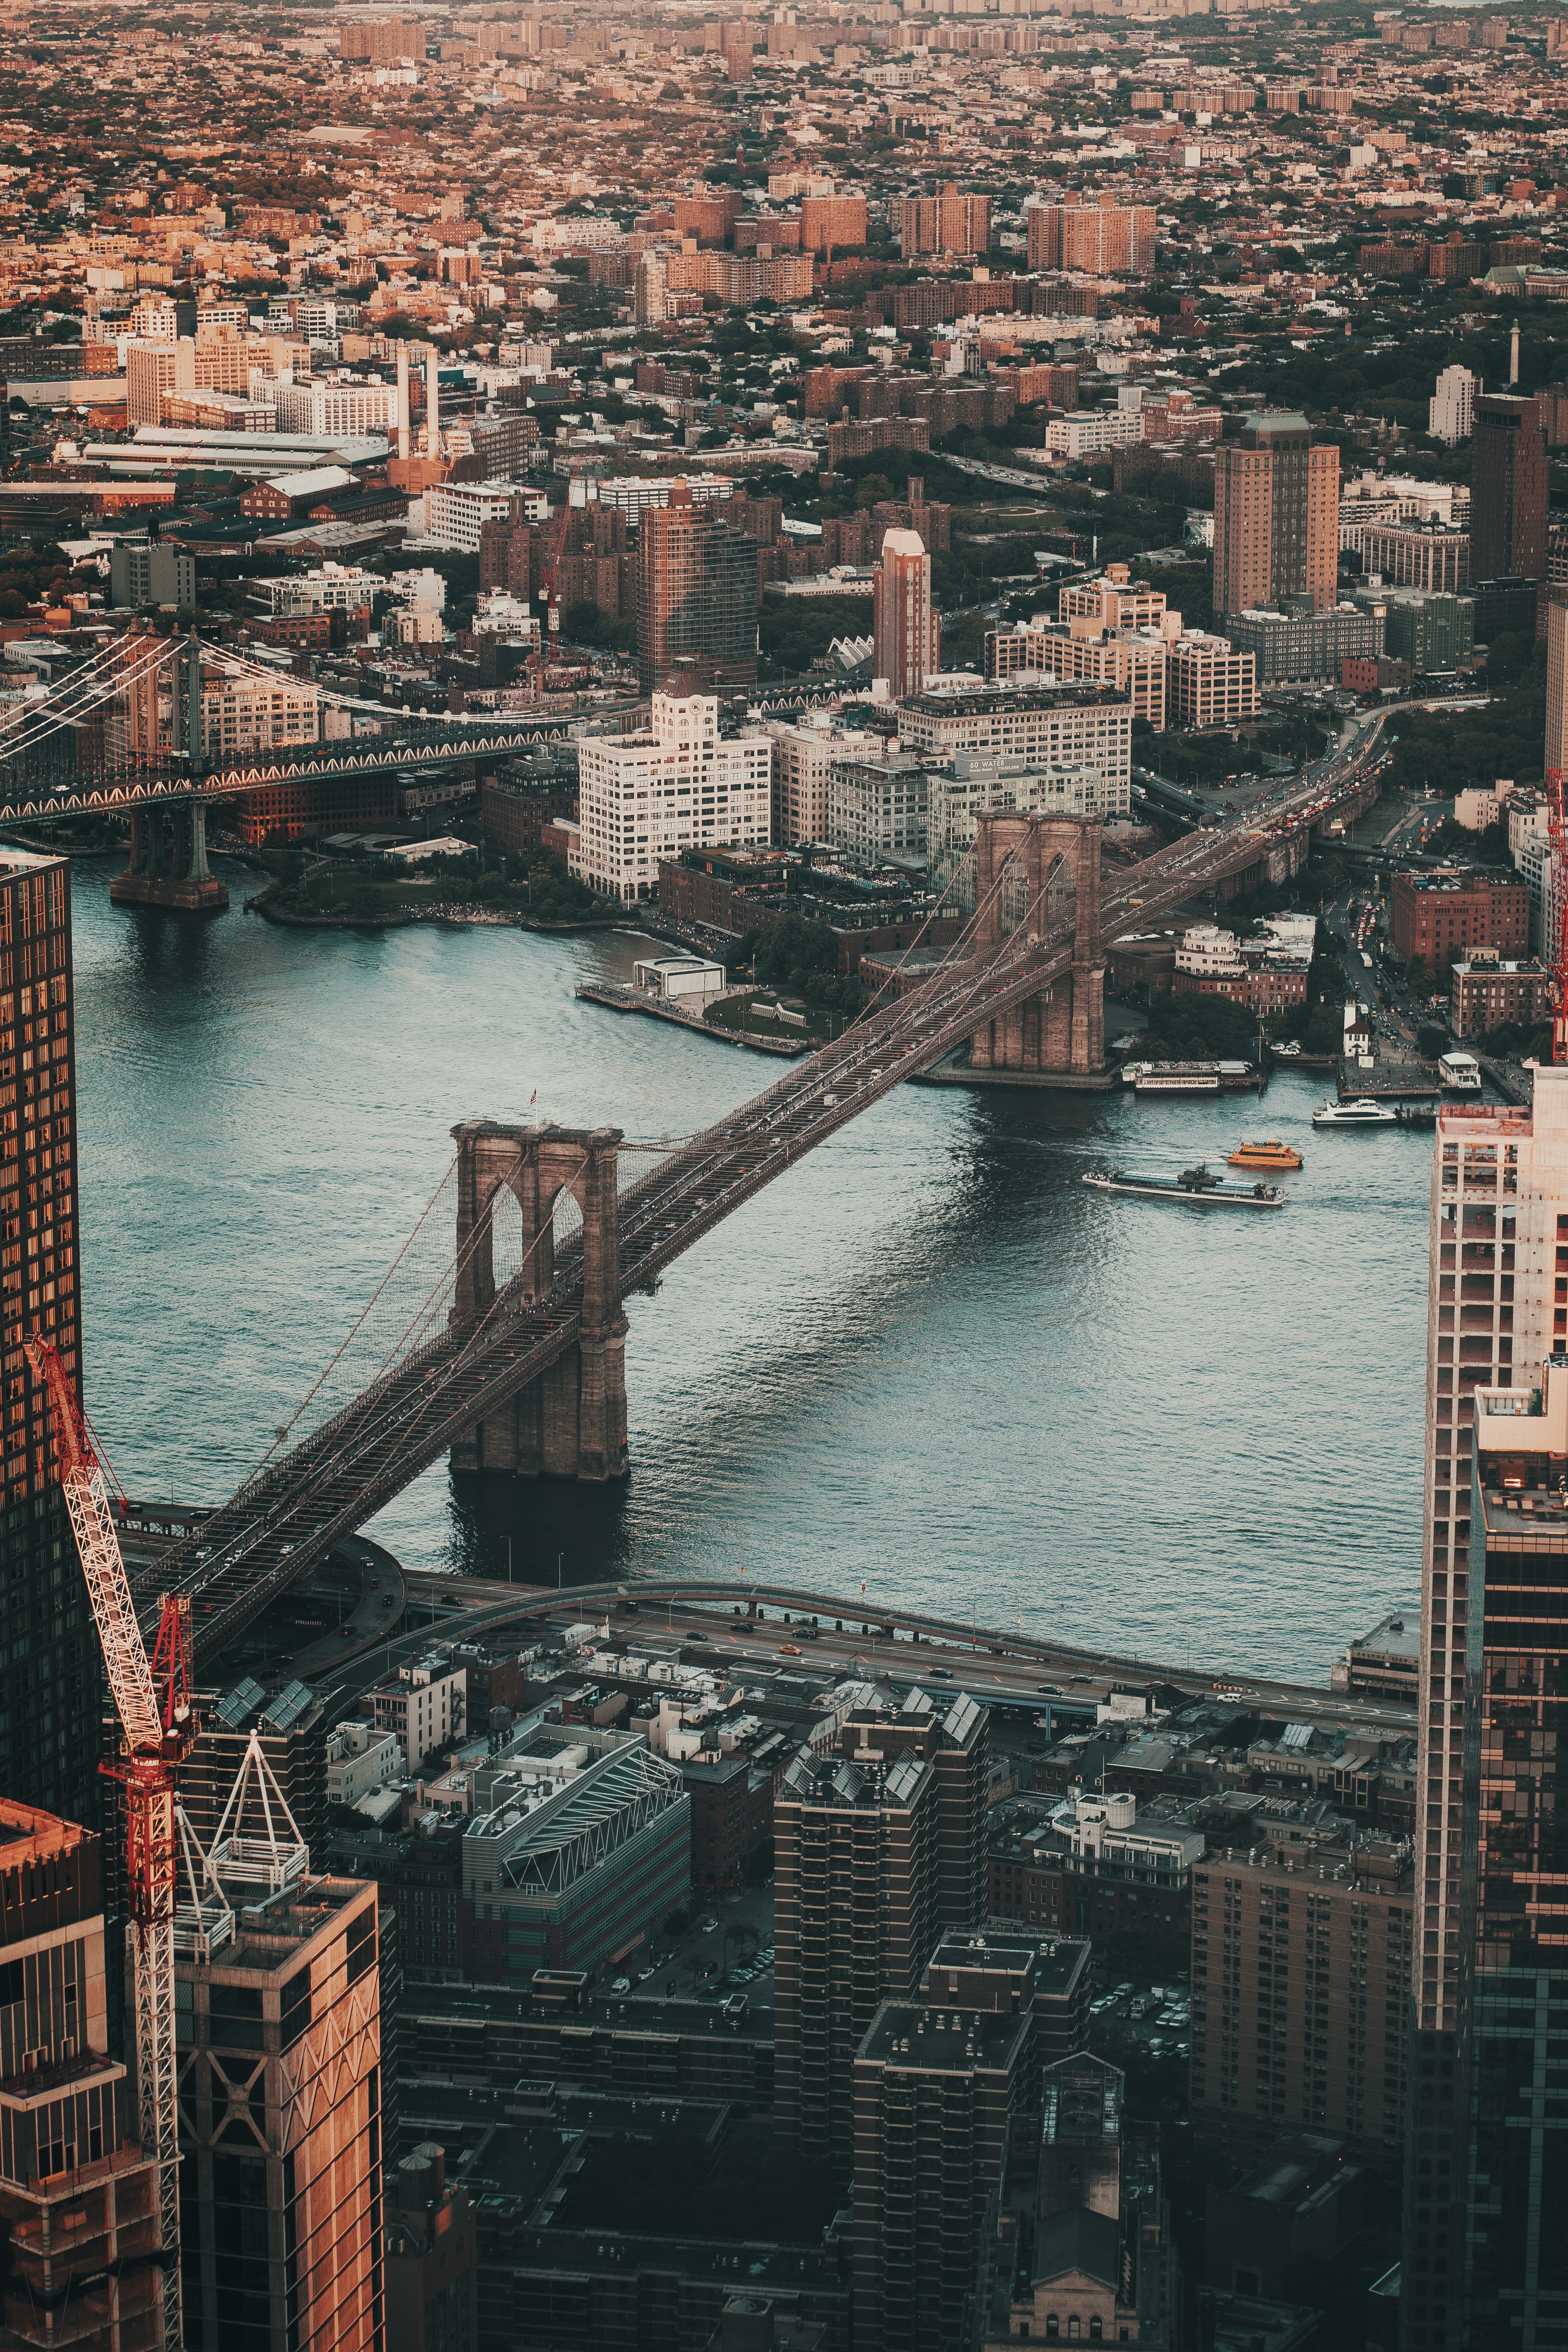 architecture, cities, rivers, city, building, view from above, bridge